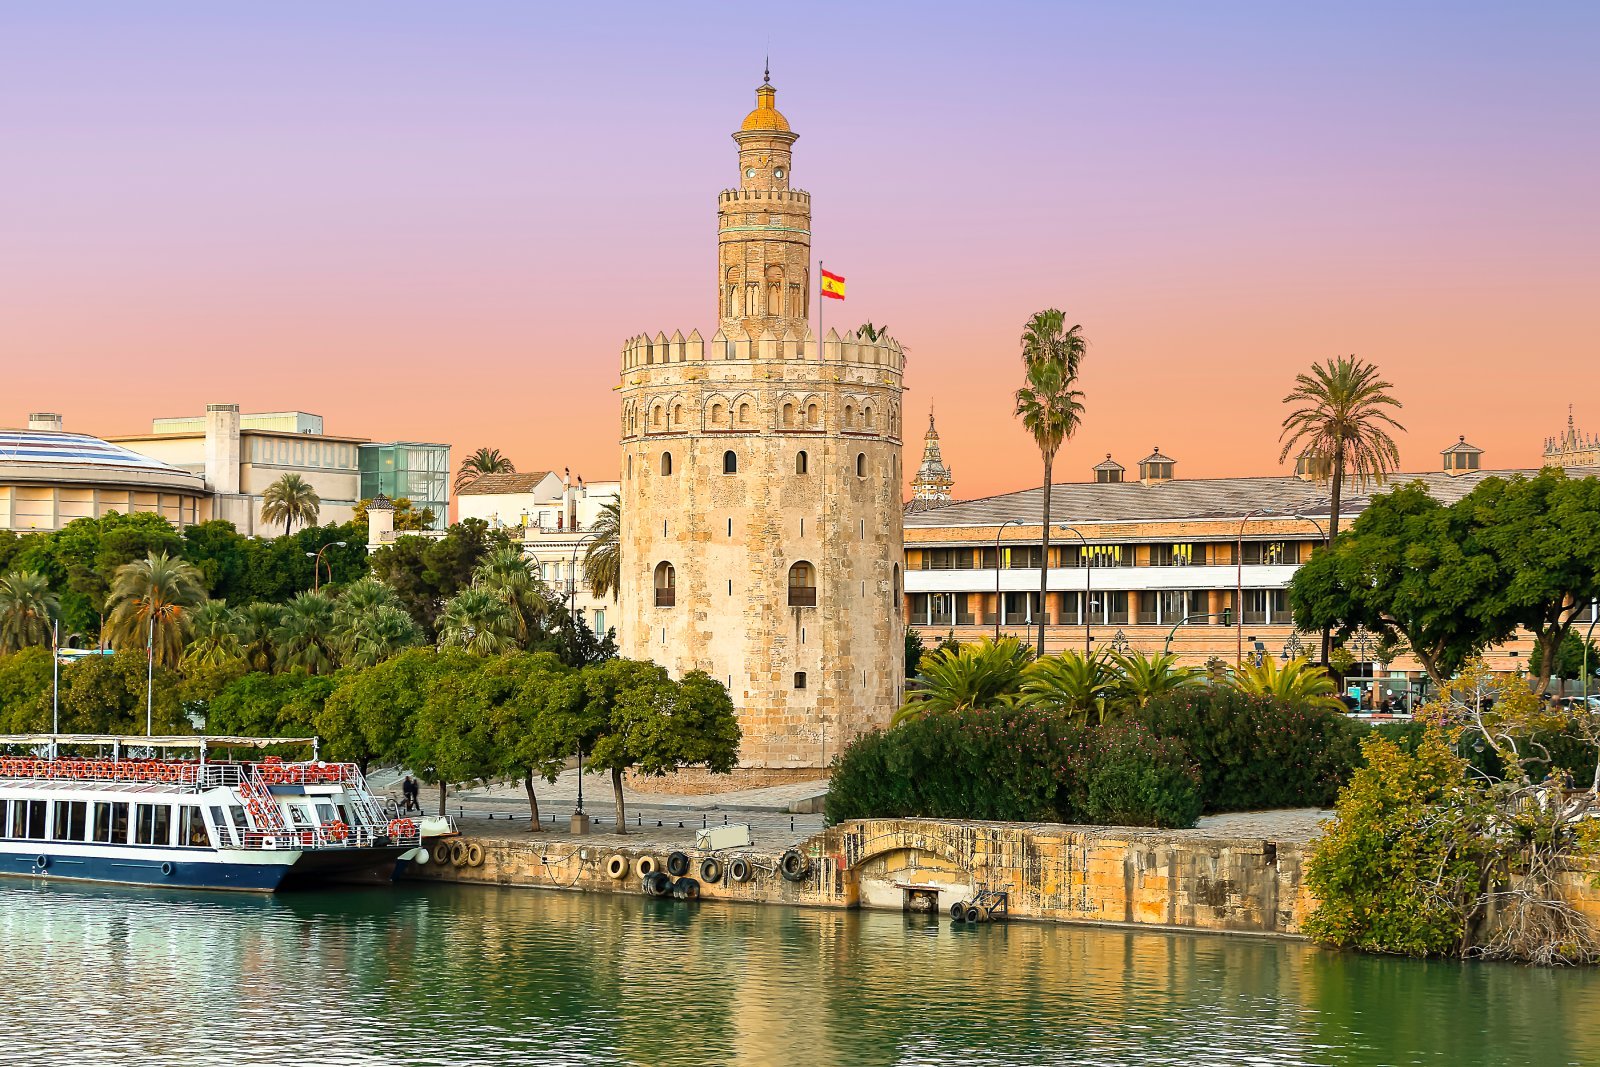 <p class="wp-caption-text">Image Credit: Shutterstock / agsaz</p>  <p>Seville provides a budget-friendly taste of Andalusian culture, with free entry to many attractions on certain days and cheap, delicious tapas.</p>